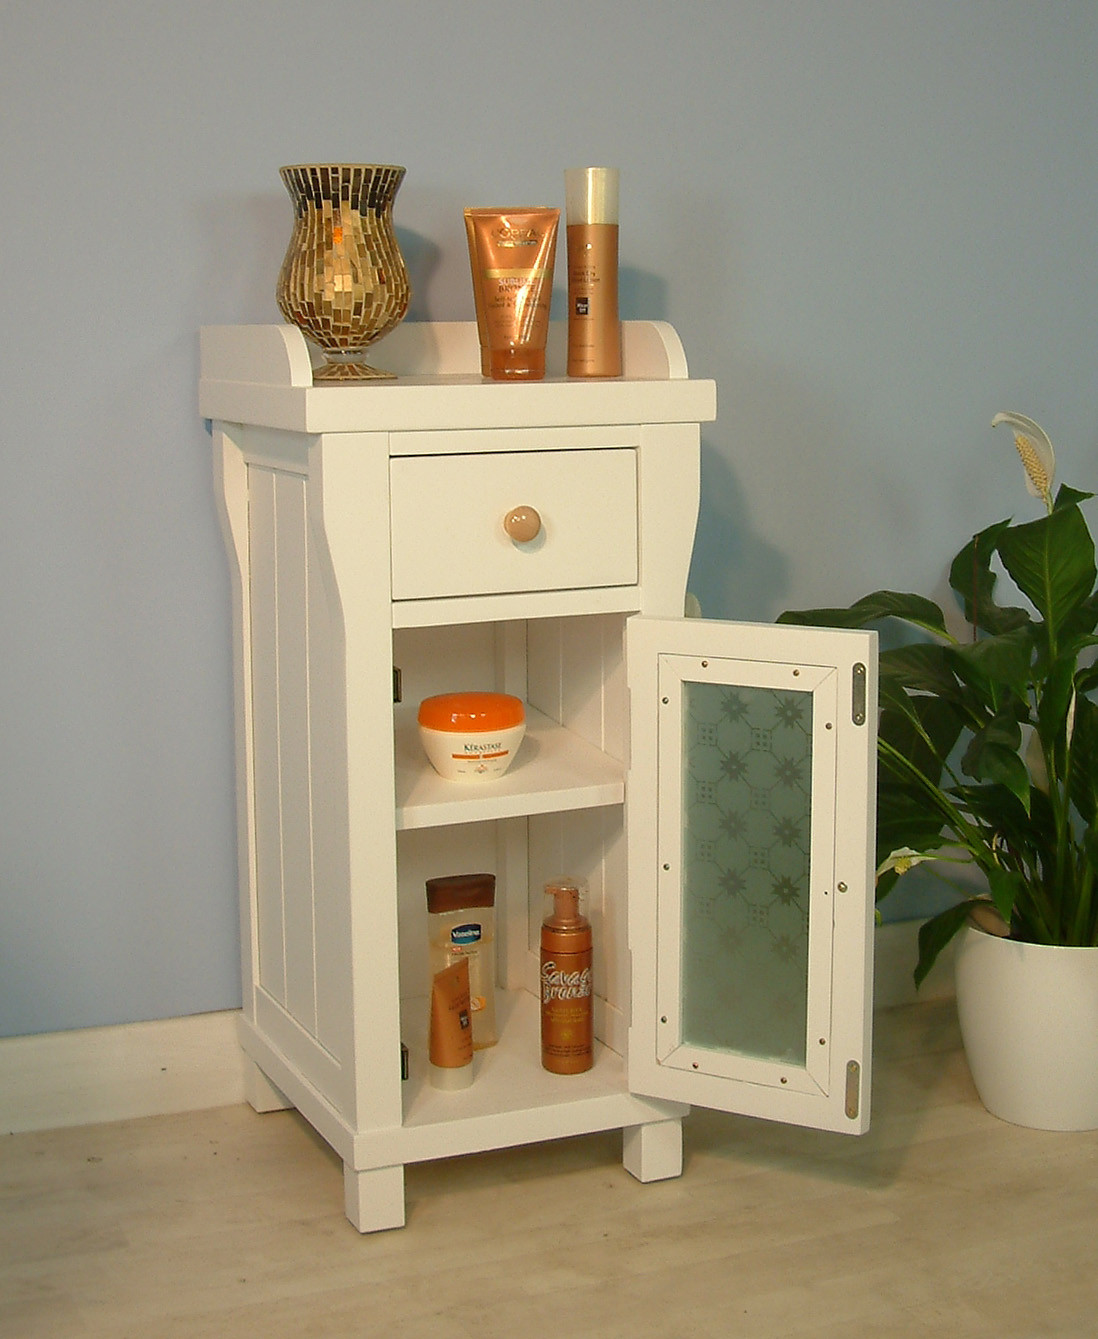 Small Bathroom Cabinets
 9 small bathroom storage ideas you cant afford to overlook